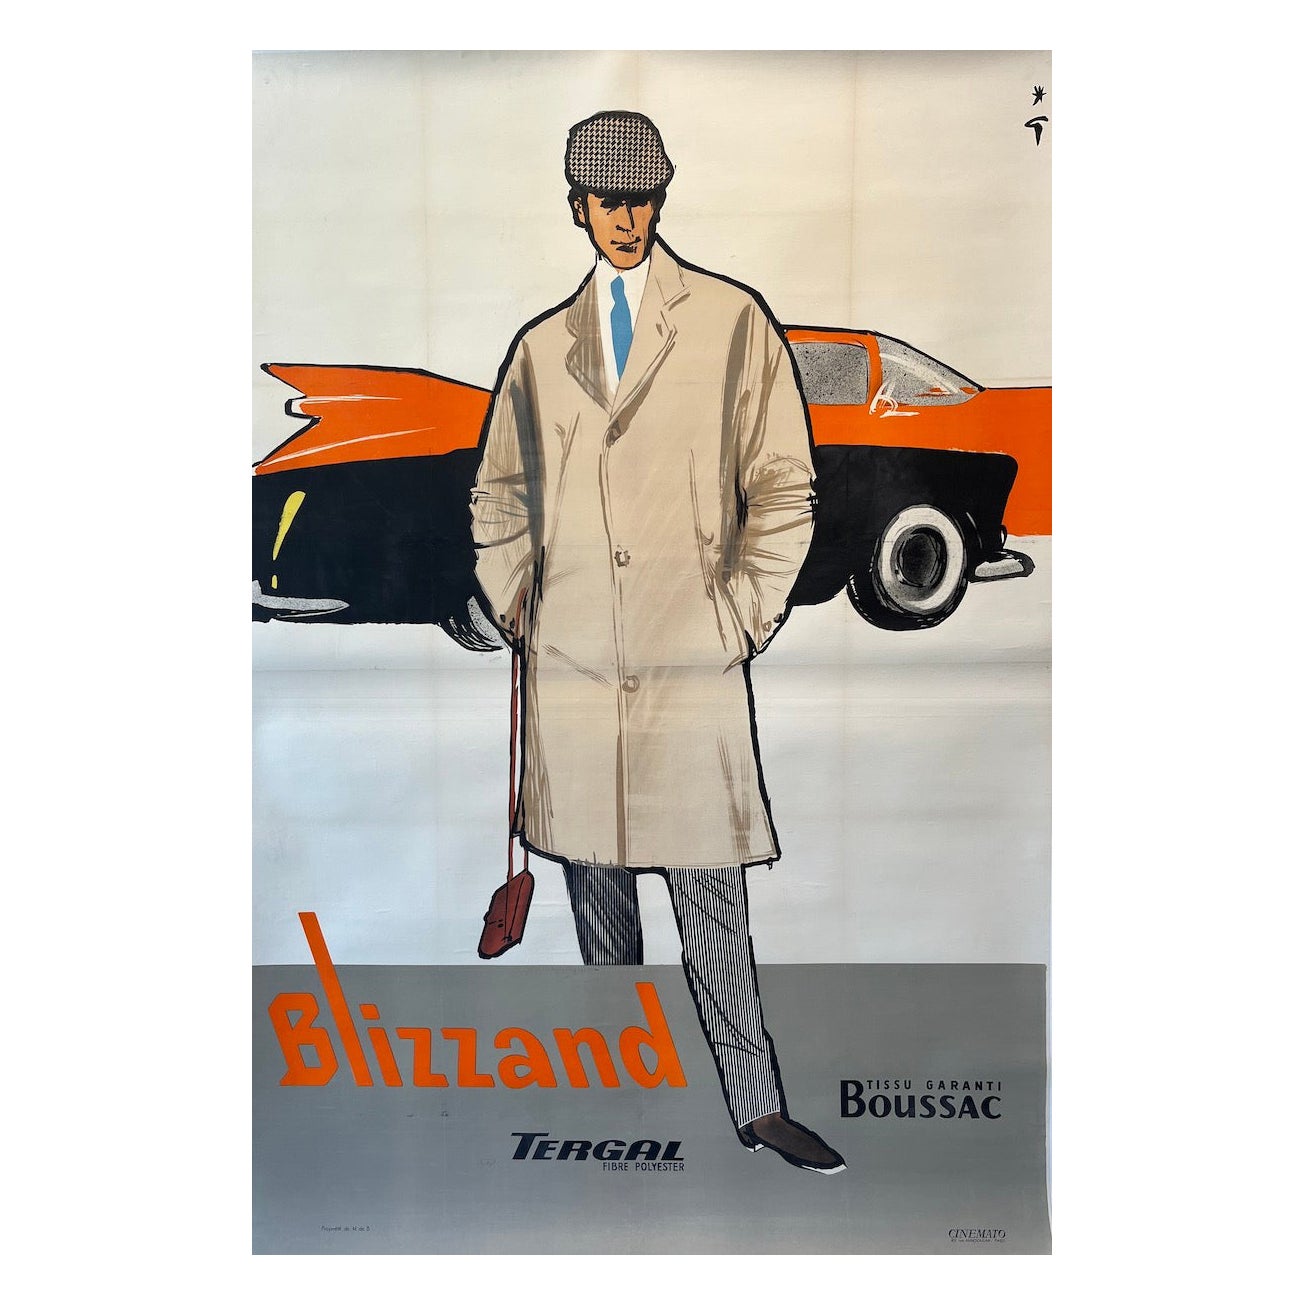 Original Vintage French Advertisi Poster, 'Blizzand Boussac' by Rene Gruau, 1965 For Sale